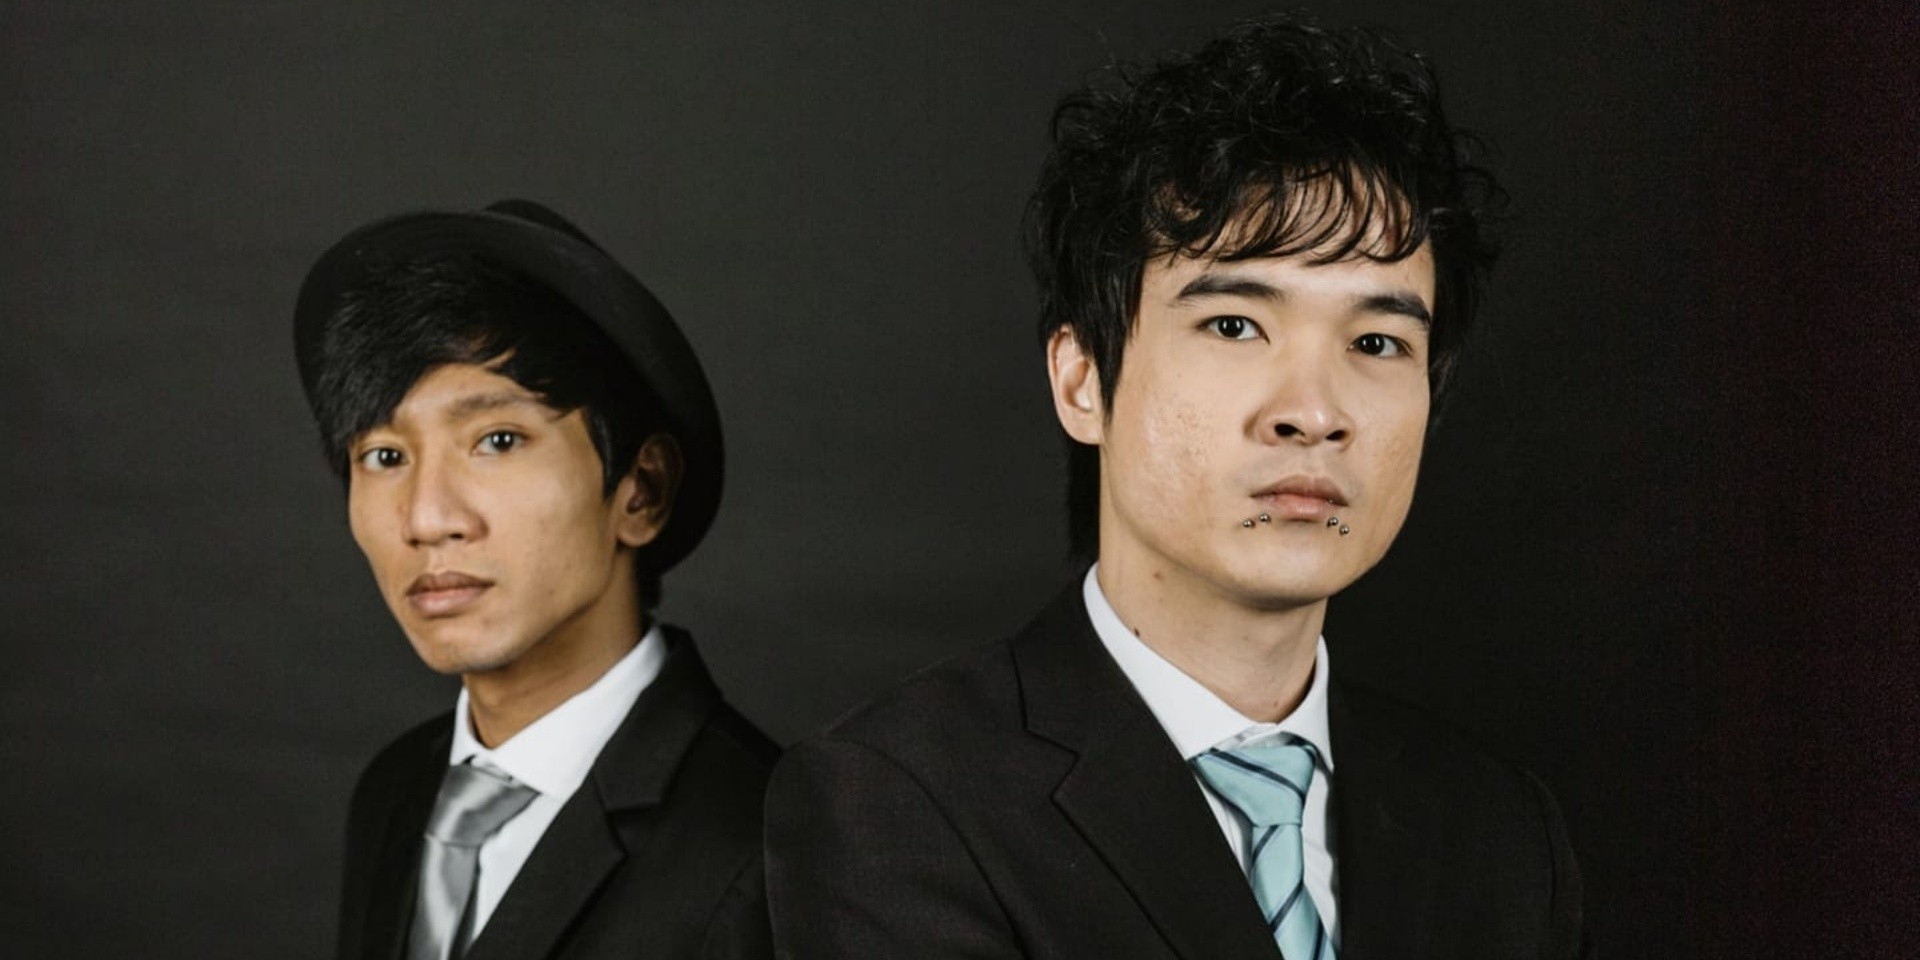 "Hardstyle is more than just a music genre": An interview with Singaporean DJ duo ParaMercy